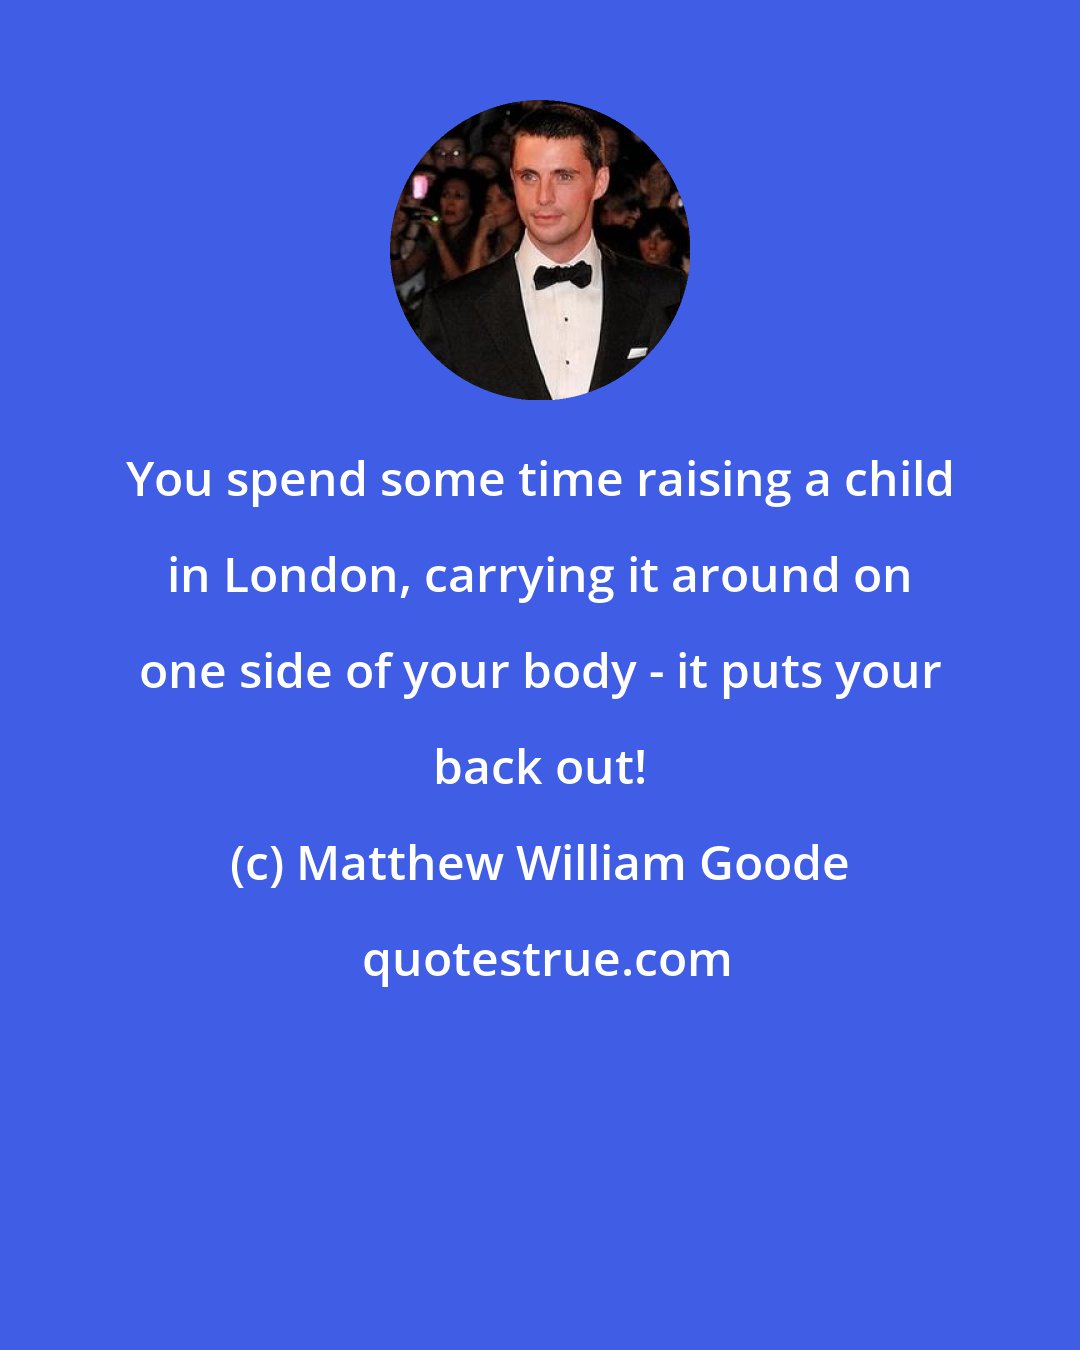 Matthew William Goode: You spend some time raising a child in London, carrying it around on one side of your body - it puts your back out!